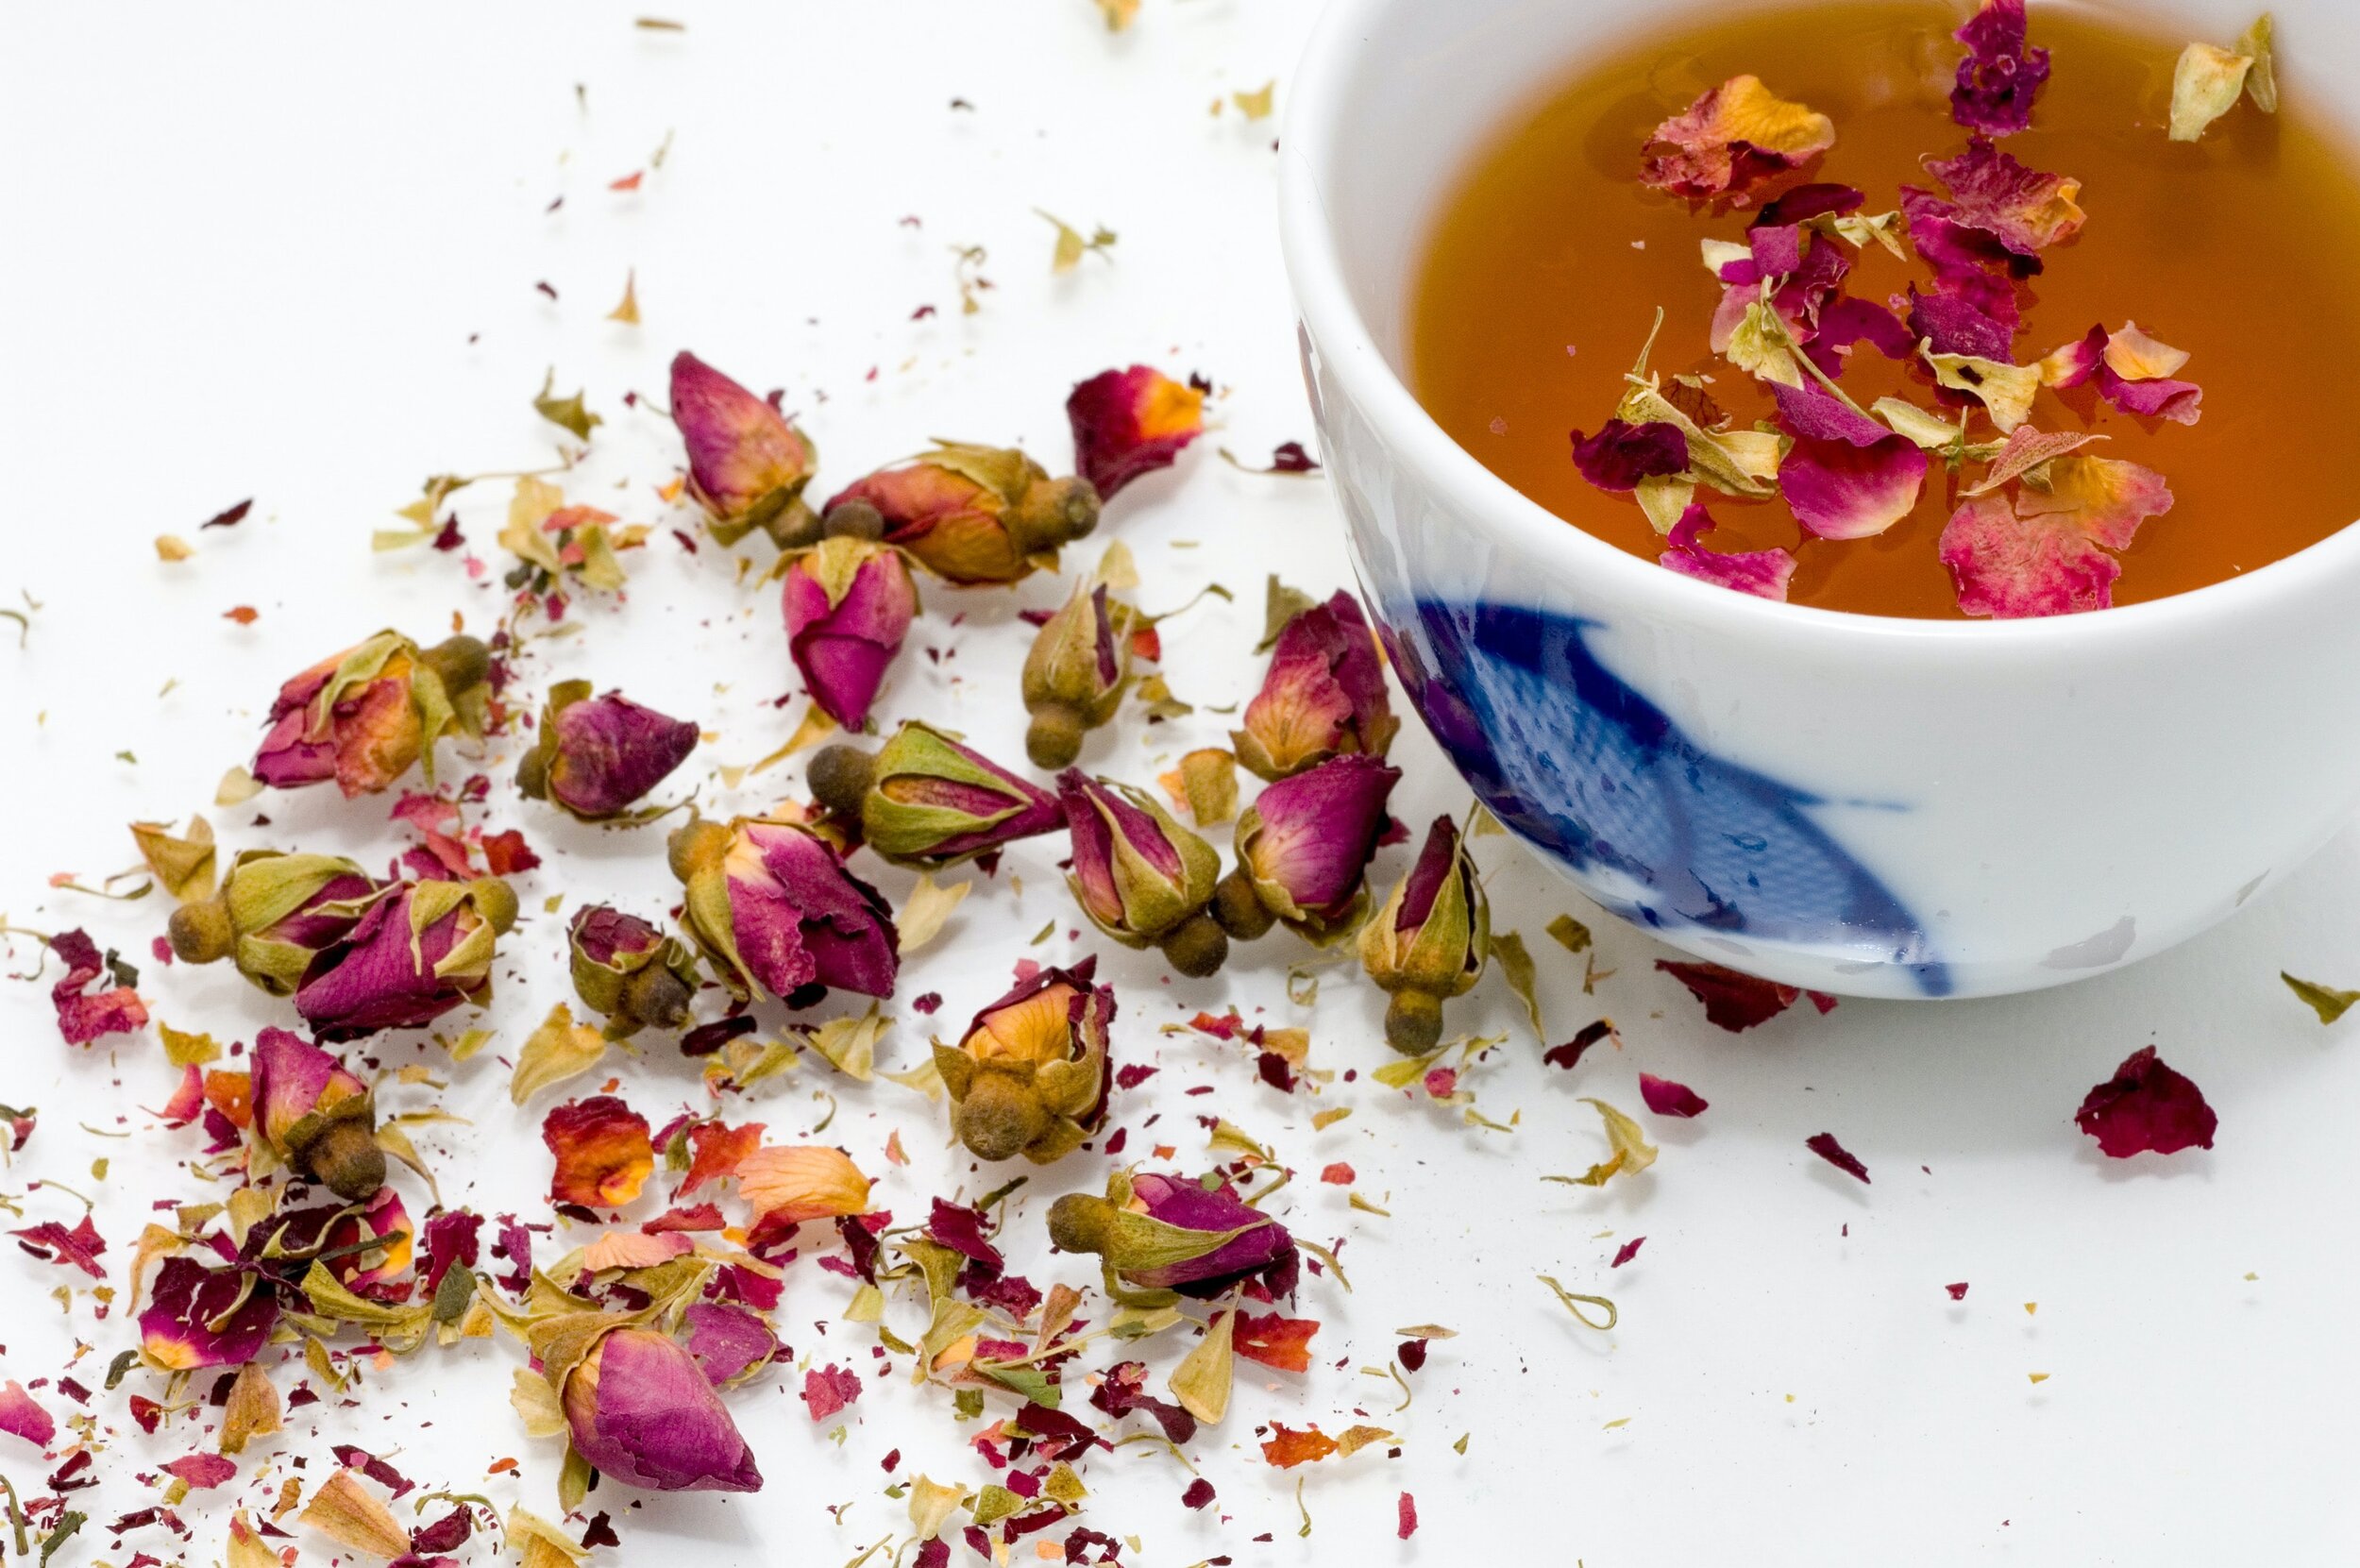 What Tea Is Good For Depression And Anxiety? 